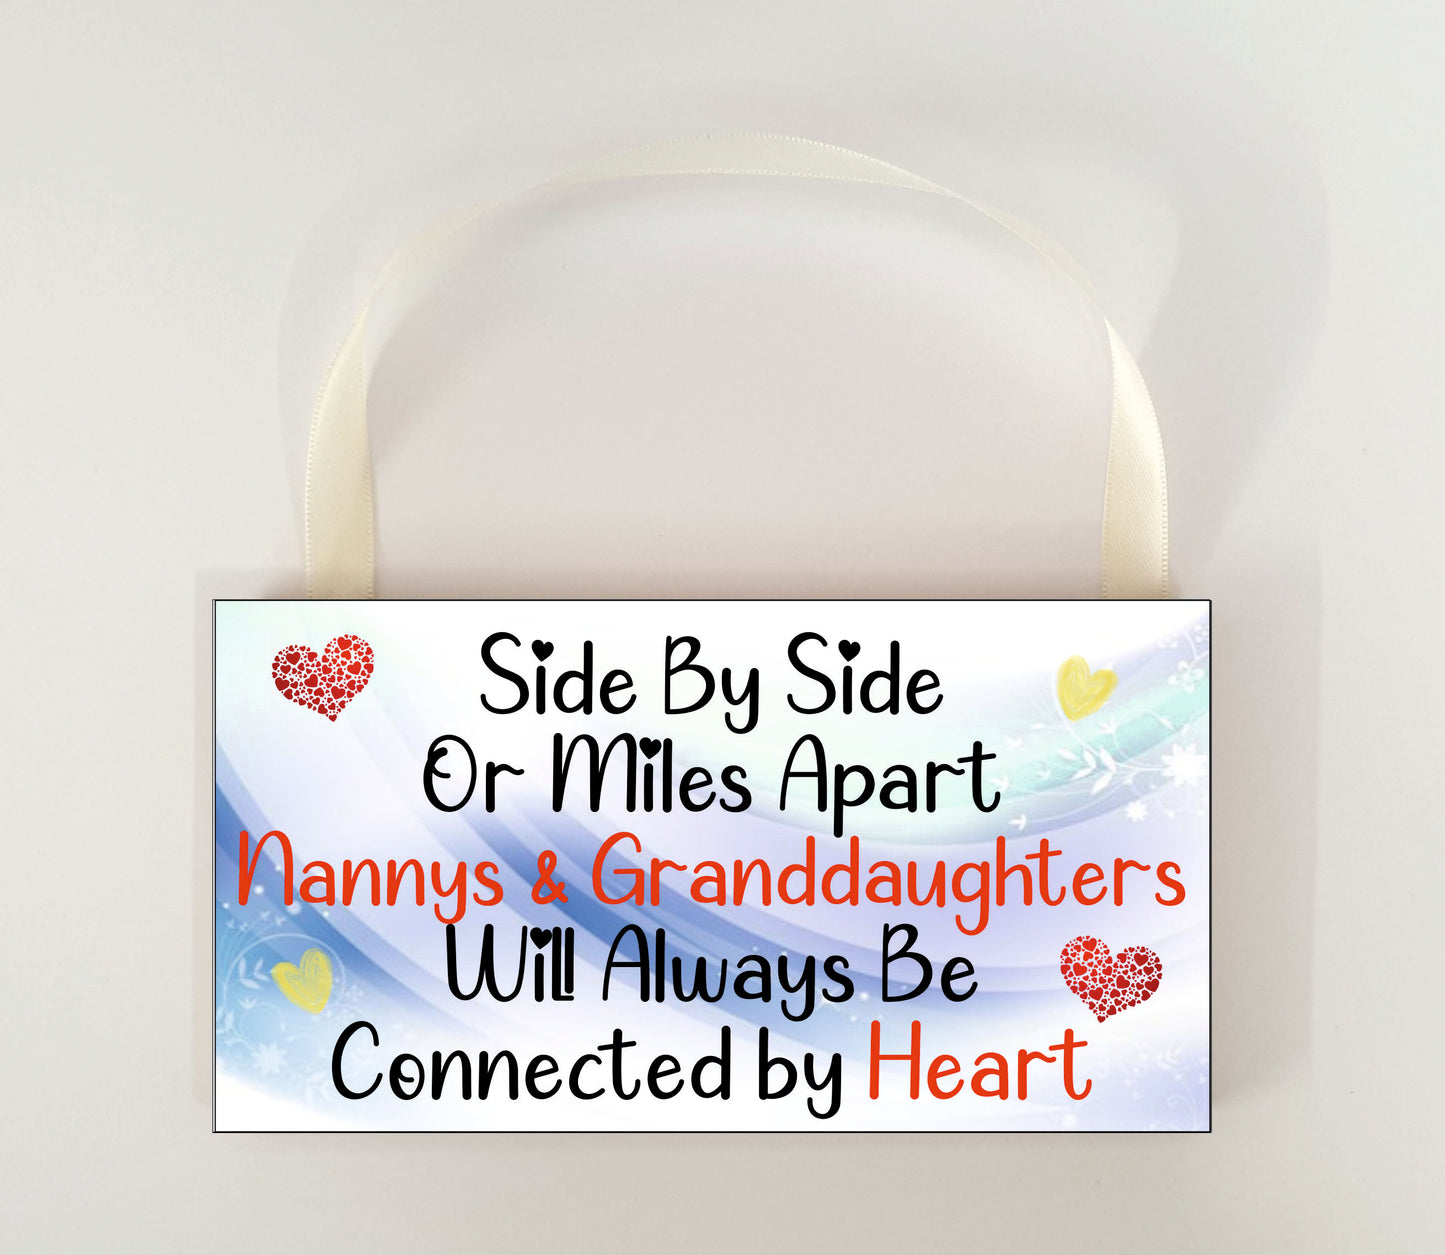 Nanny Granddaughter Plaque Gift - Side By Side Or Miles Apart - Fun Novelty Birthday Christmas Present